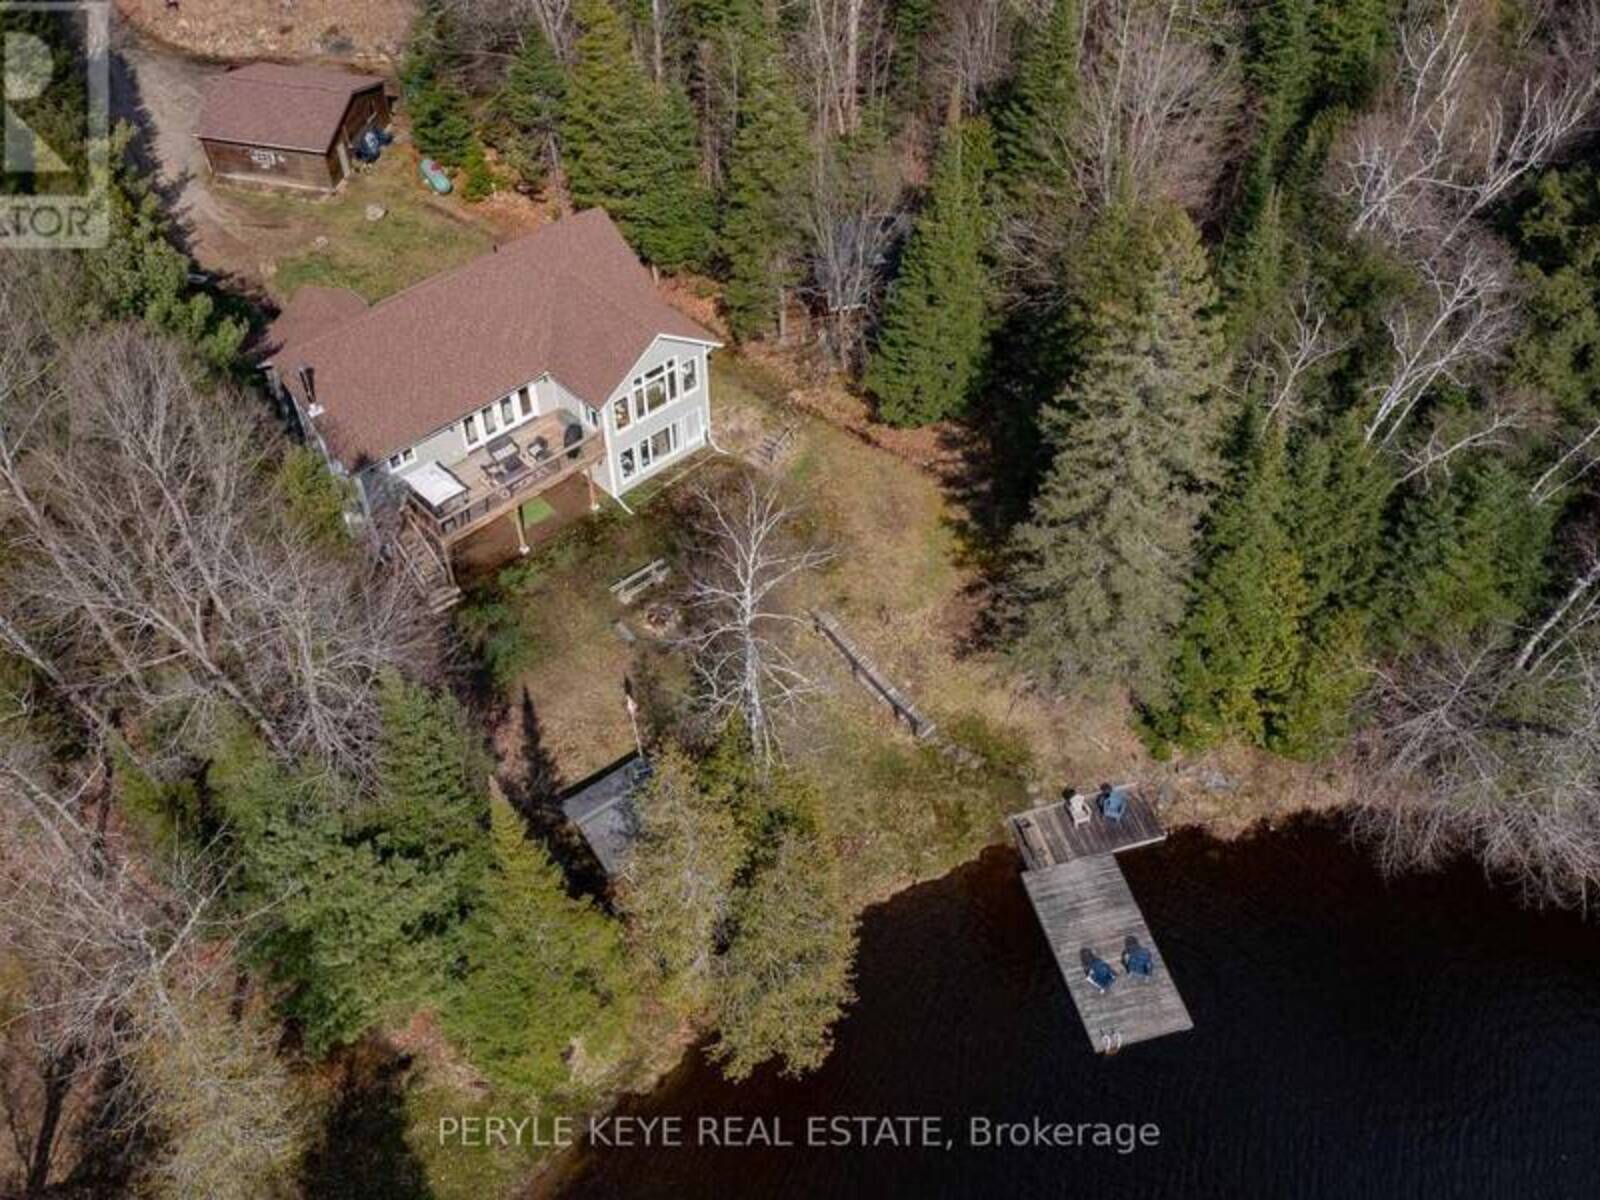 1305 BELLWOOD ACRES ROAD, Lake of Bays, Ontario P0B 1A0